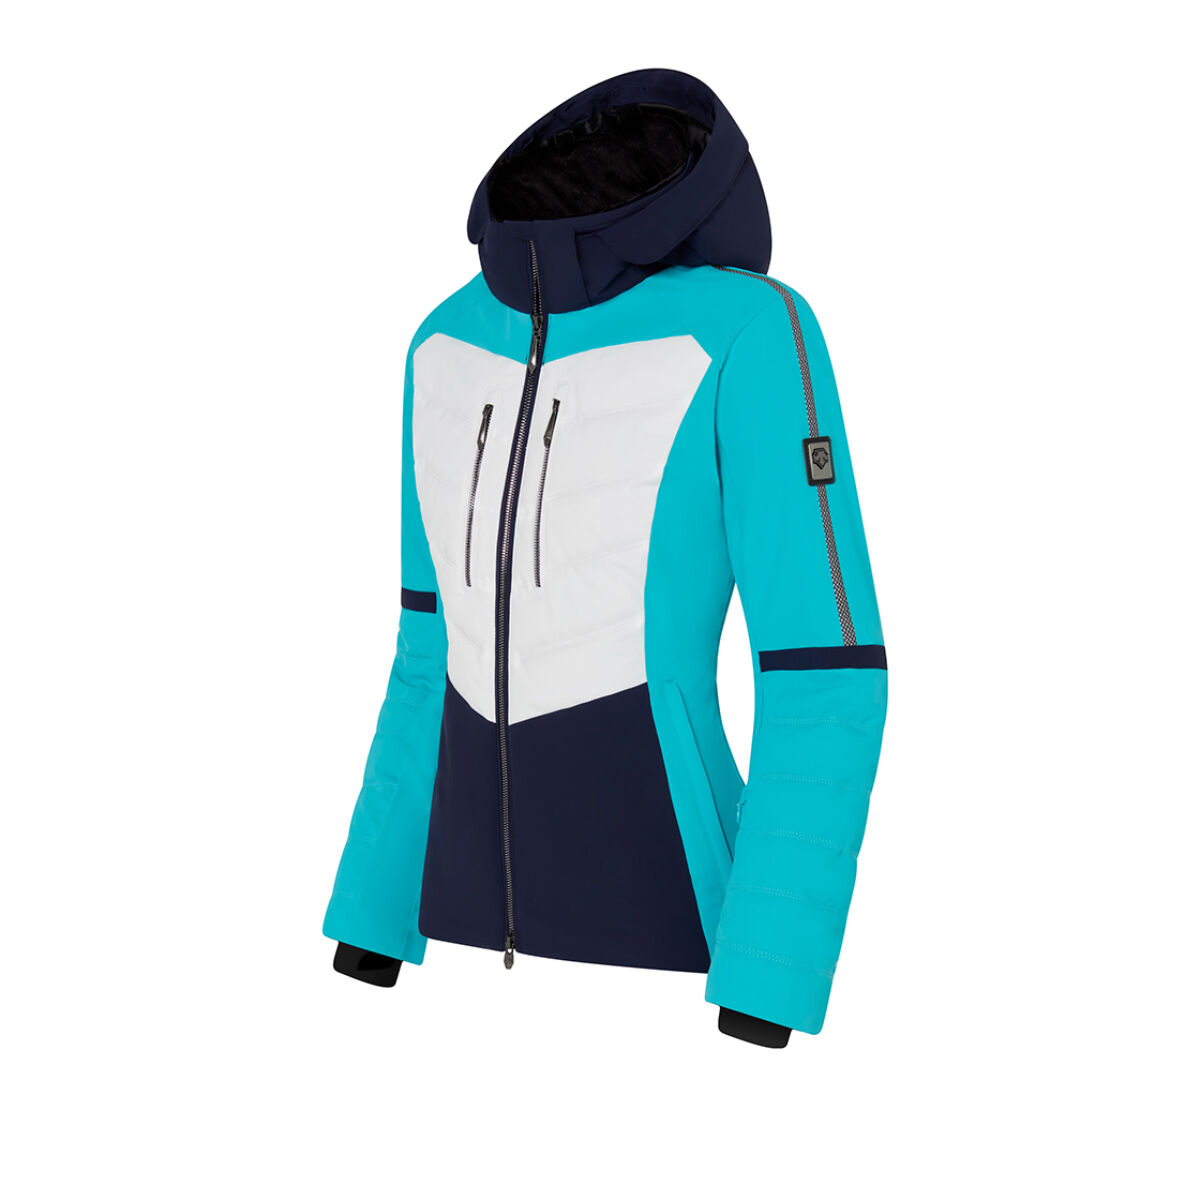 Descente Ski Jackets, Pants, and Clothing - Women's, Mens, and